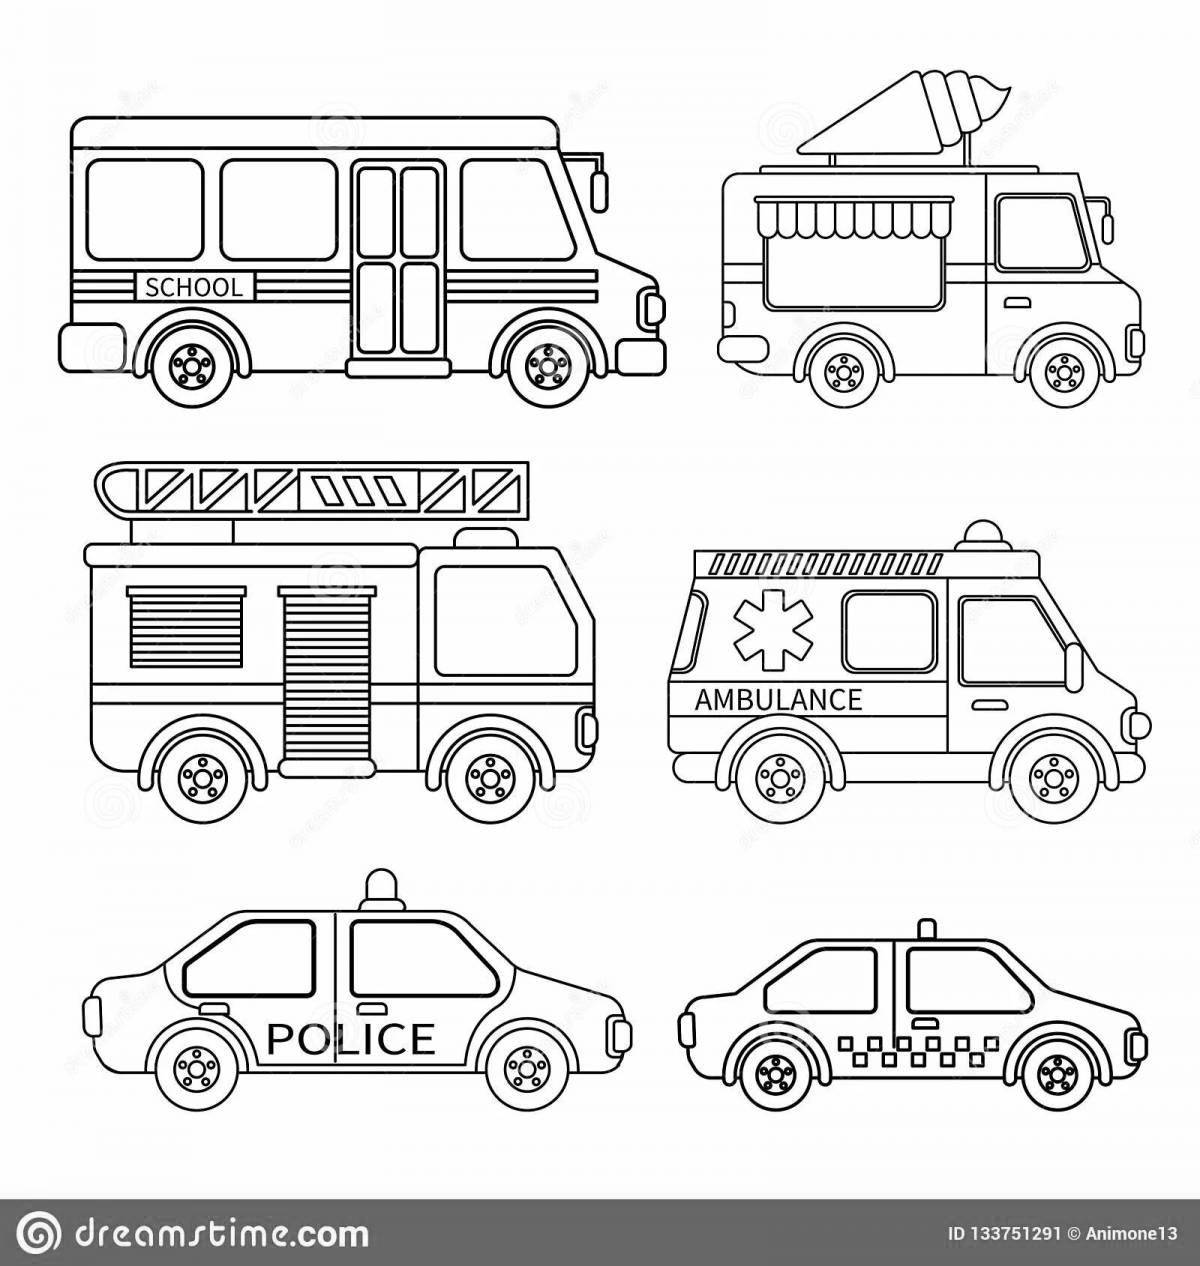 Special vehicle fun coloring